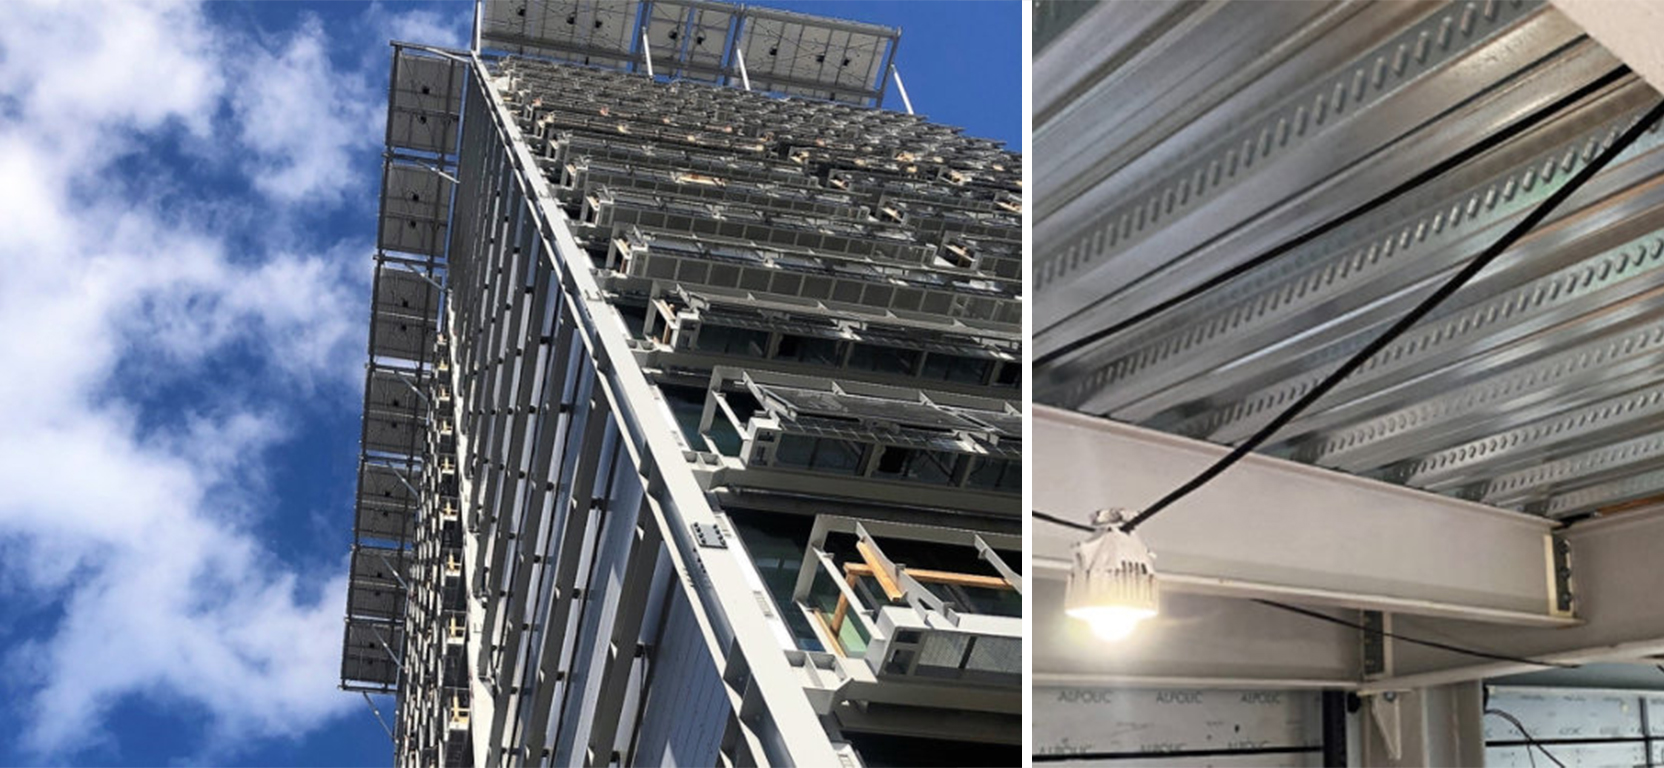 Left image: Angle looking up the side of a high-rise building with exposed structural steel. Right image: Detail shot of structural steel inside the building with hanging light in foreground.